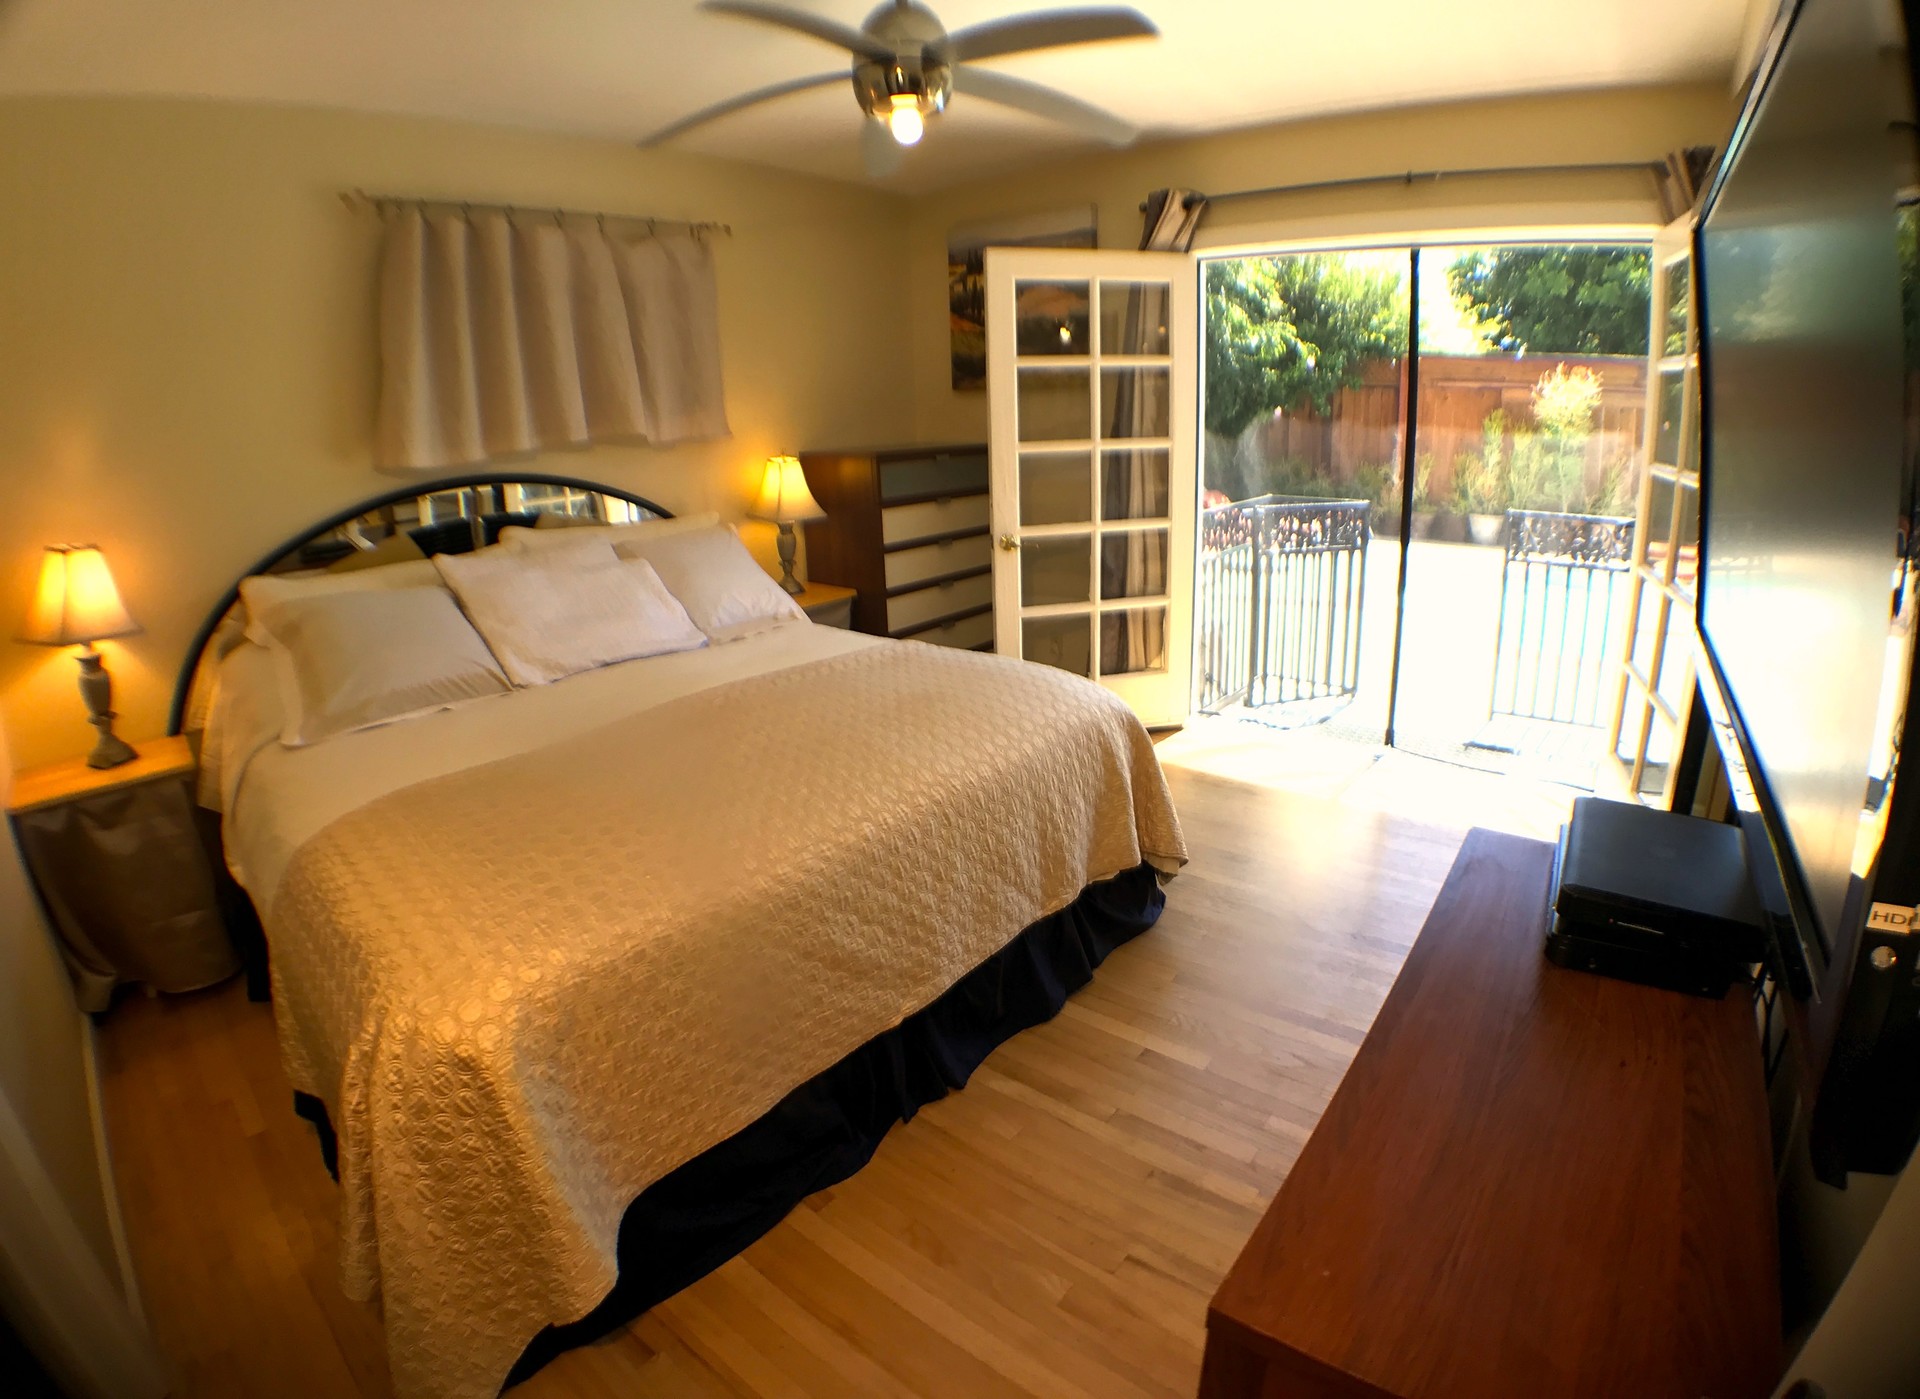 Master Bedroom French Doors Open To A Beautiful Pool And Soft Fountain Sounds To Sleep Room For Rent La Mirada